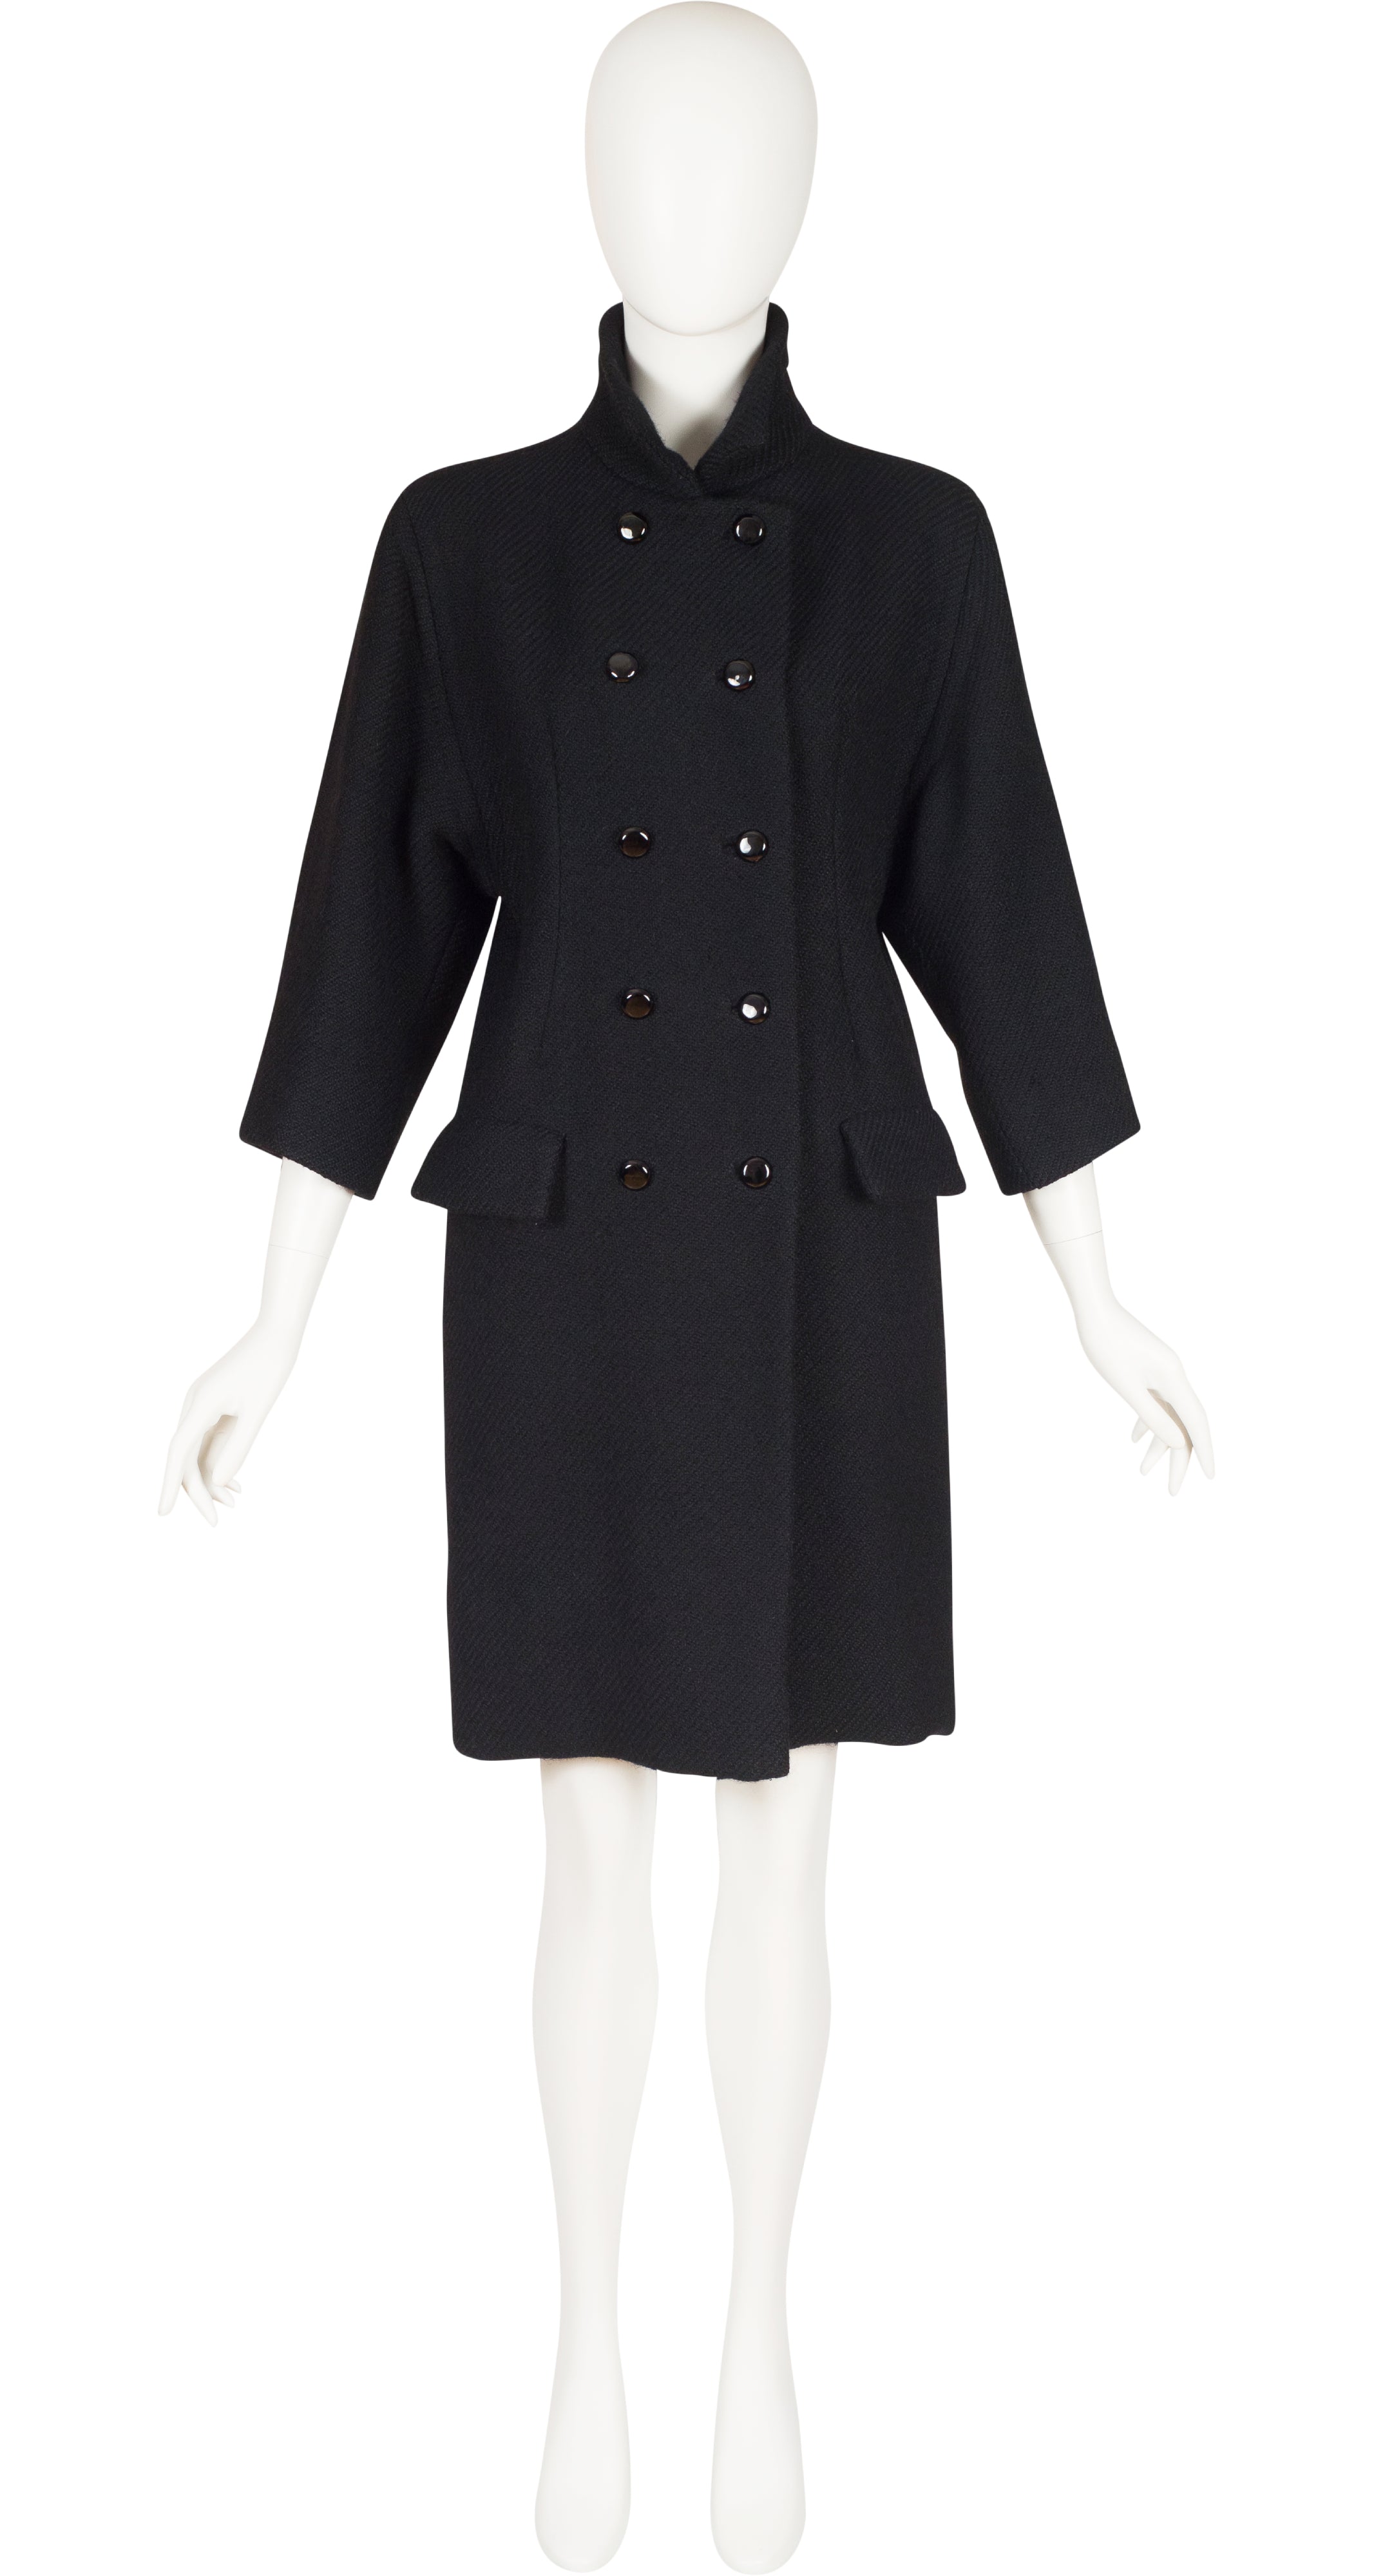 1960s Black Wool Tailored Double-Breasted Coat